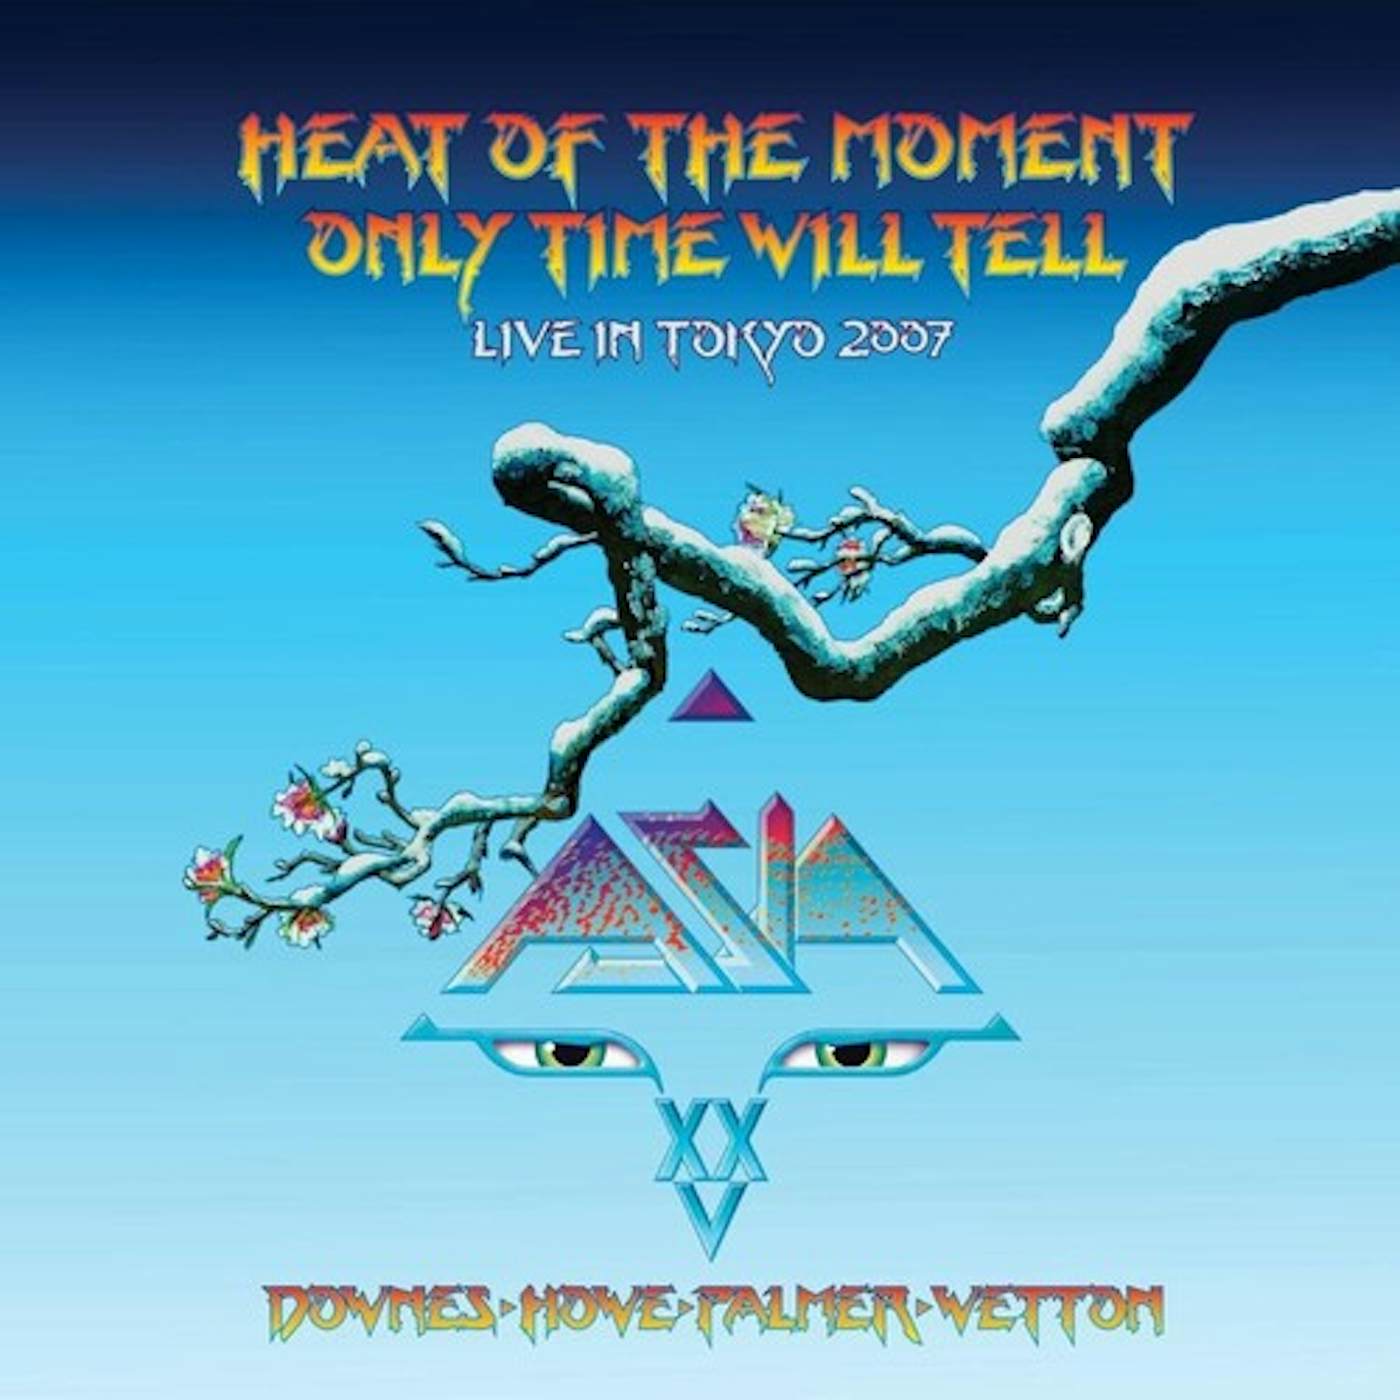 Asia Heat Of The Moment Live In Tokyo 2007 vinyl record